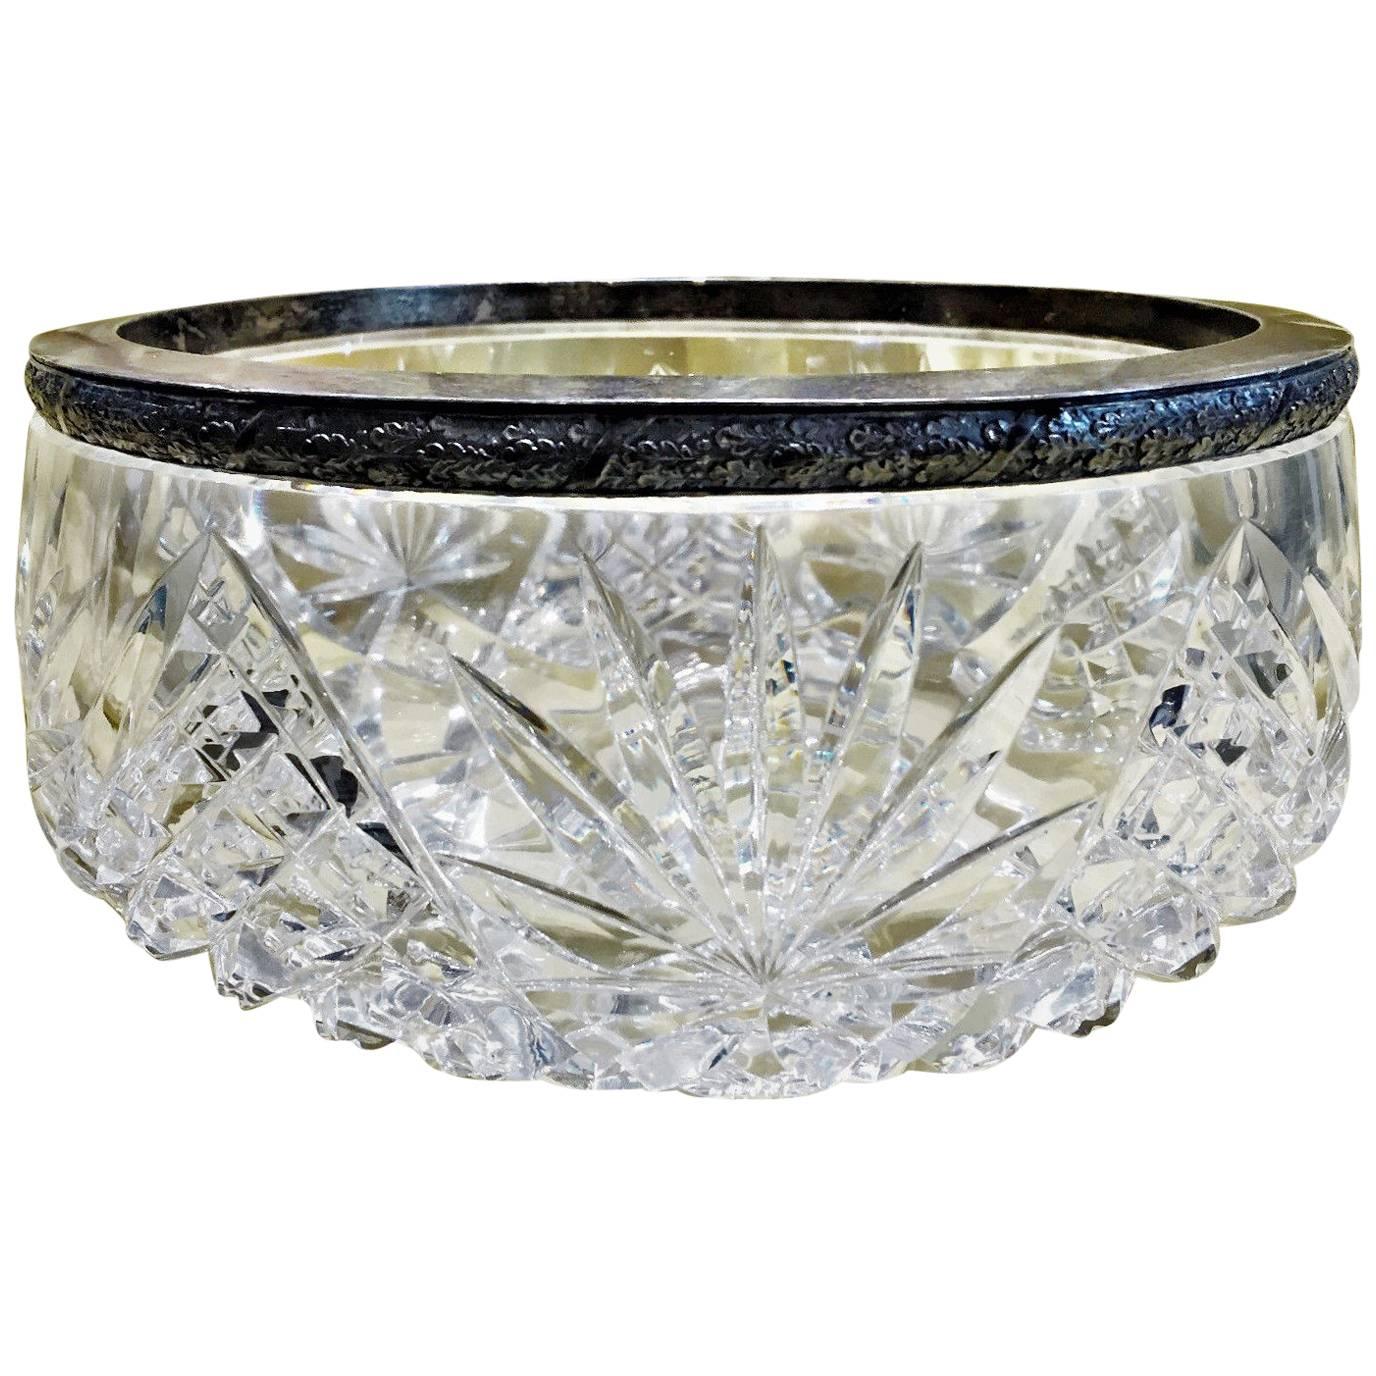 Vintage Russian Soviet Classic Large Crystal and Silver Circular Bowl, ca. 1945 For Sale